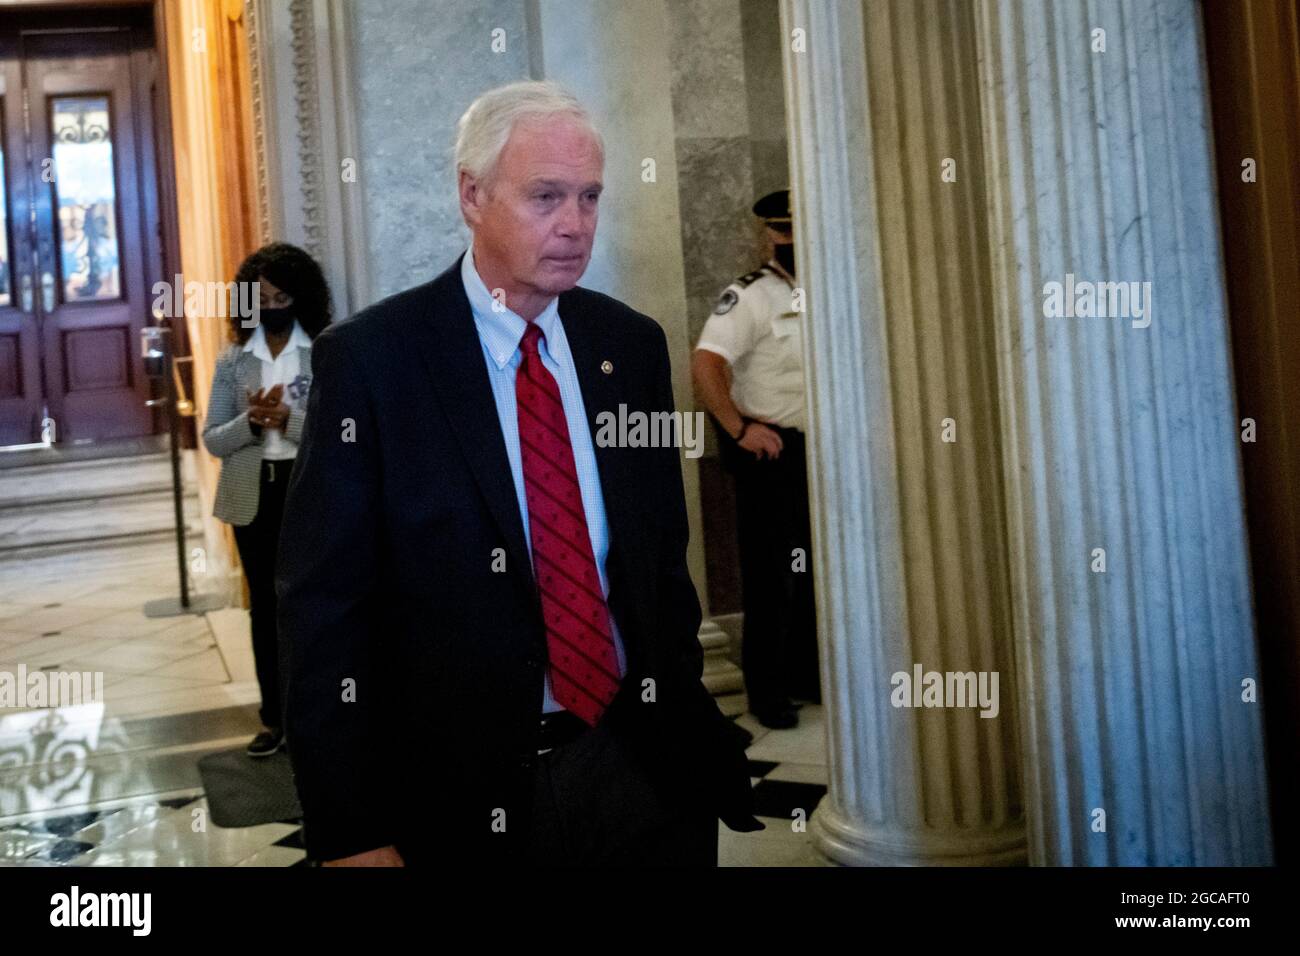 Washington, United States Of America. 07th Aug, 2021. United States Senator Ron Johnson (Republican of Wisconsin) departs the Senate chamber during a vote at the US Capitol in Washington, DC, Saturday, August 7, 2021. (Photo by Rod Lamkey/CNP/Sipa USA) Credit: Sipa USA/Alamy Live News Stock Photo